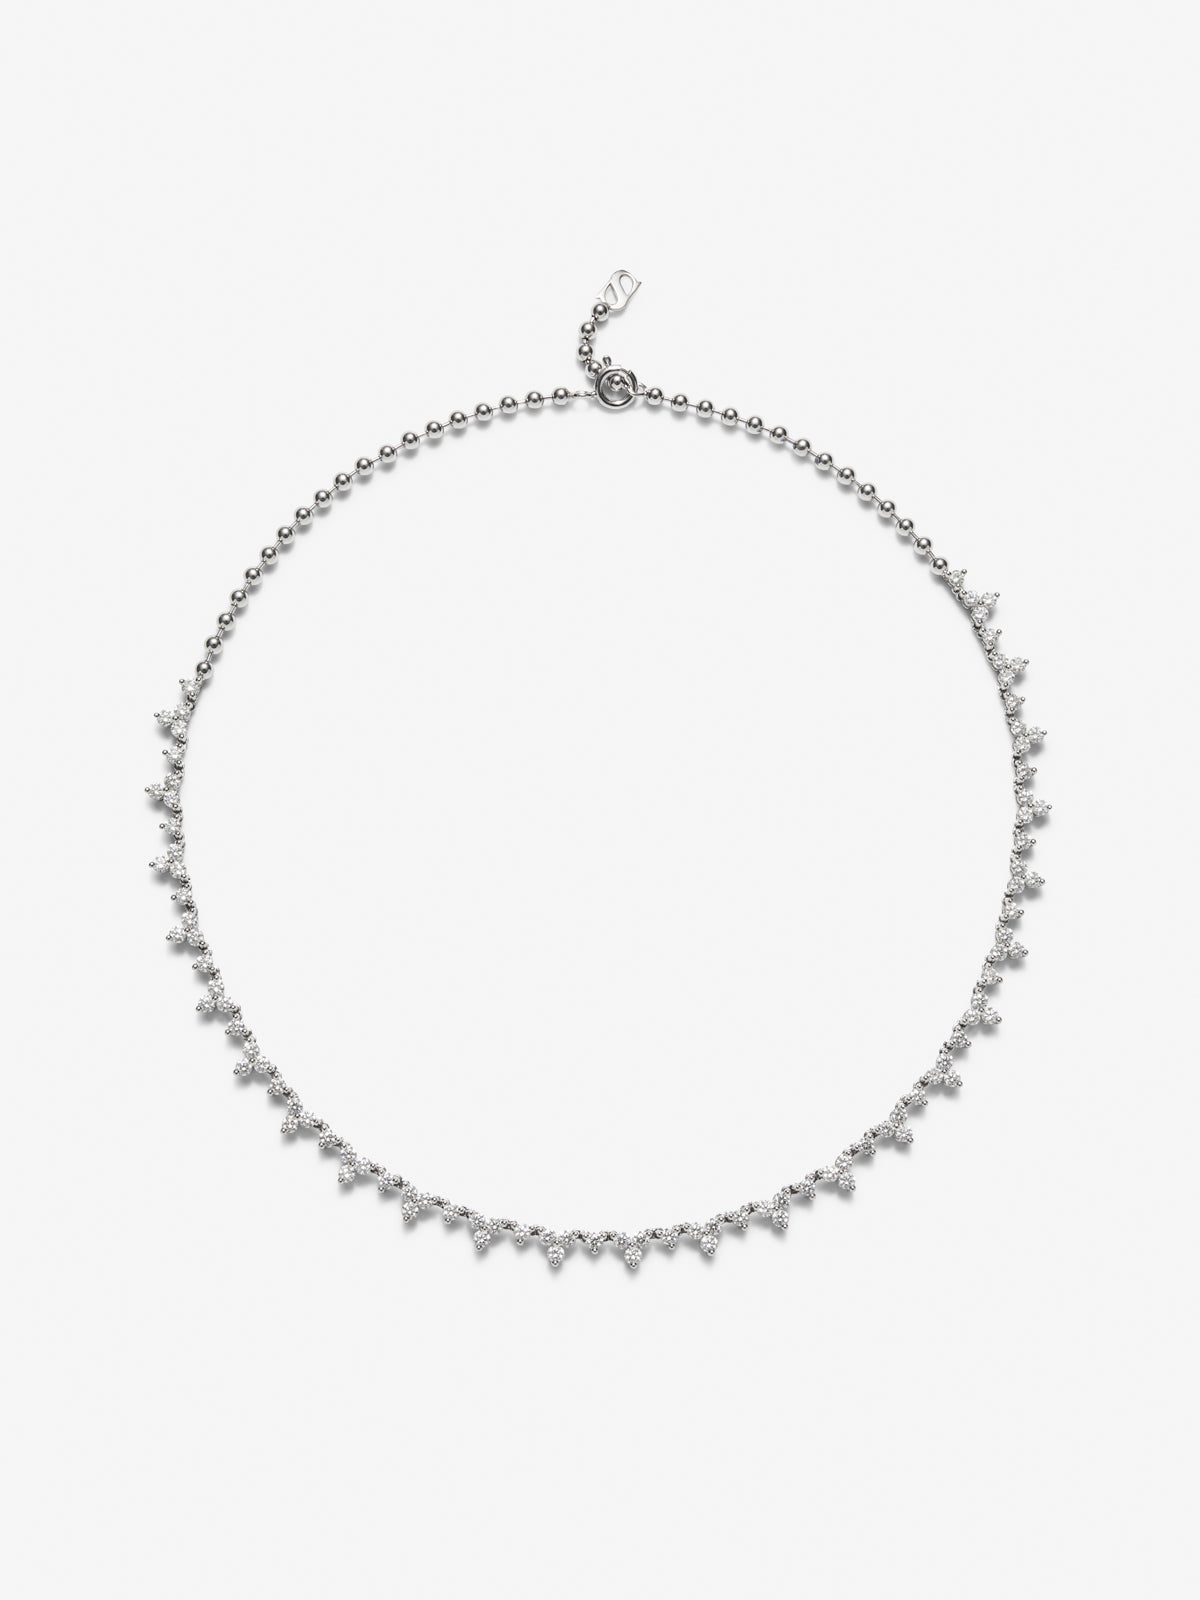 18K white gold rivière necklace with 97 brilliant-cut diamonds with a total of 5.33 cts